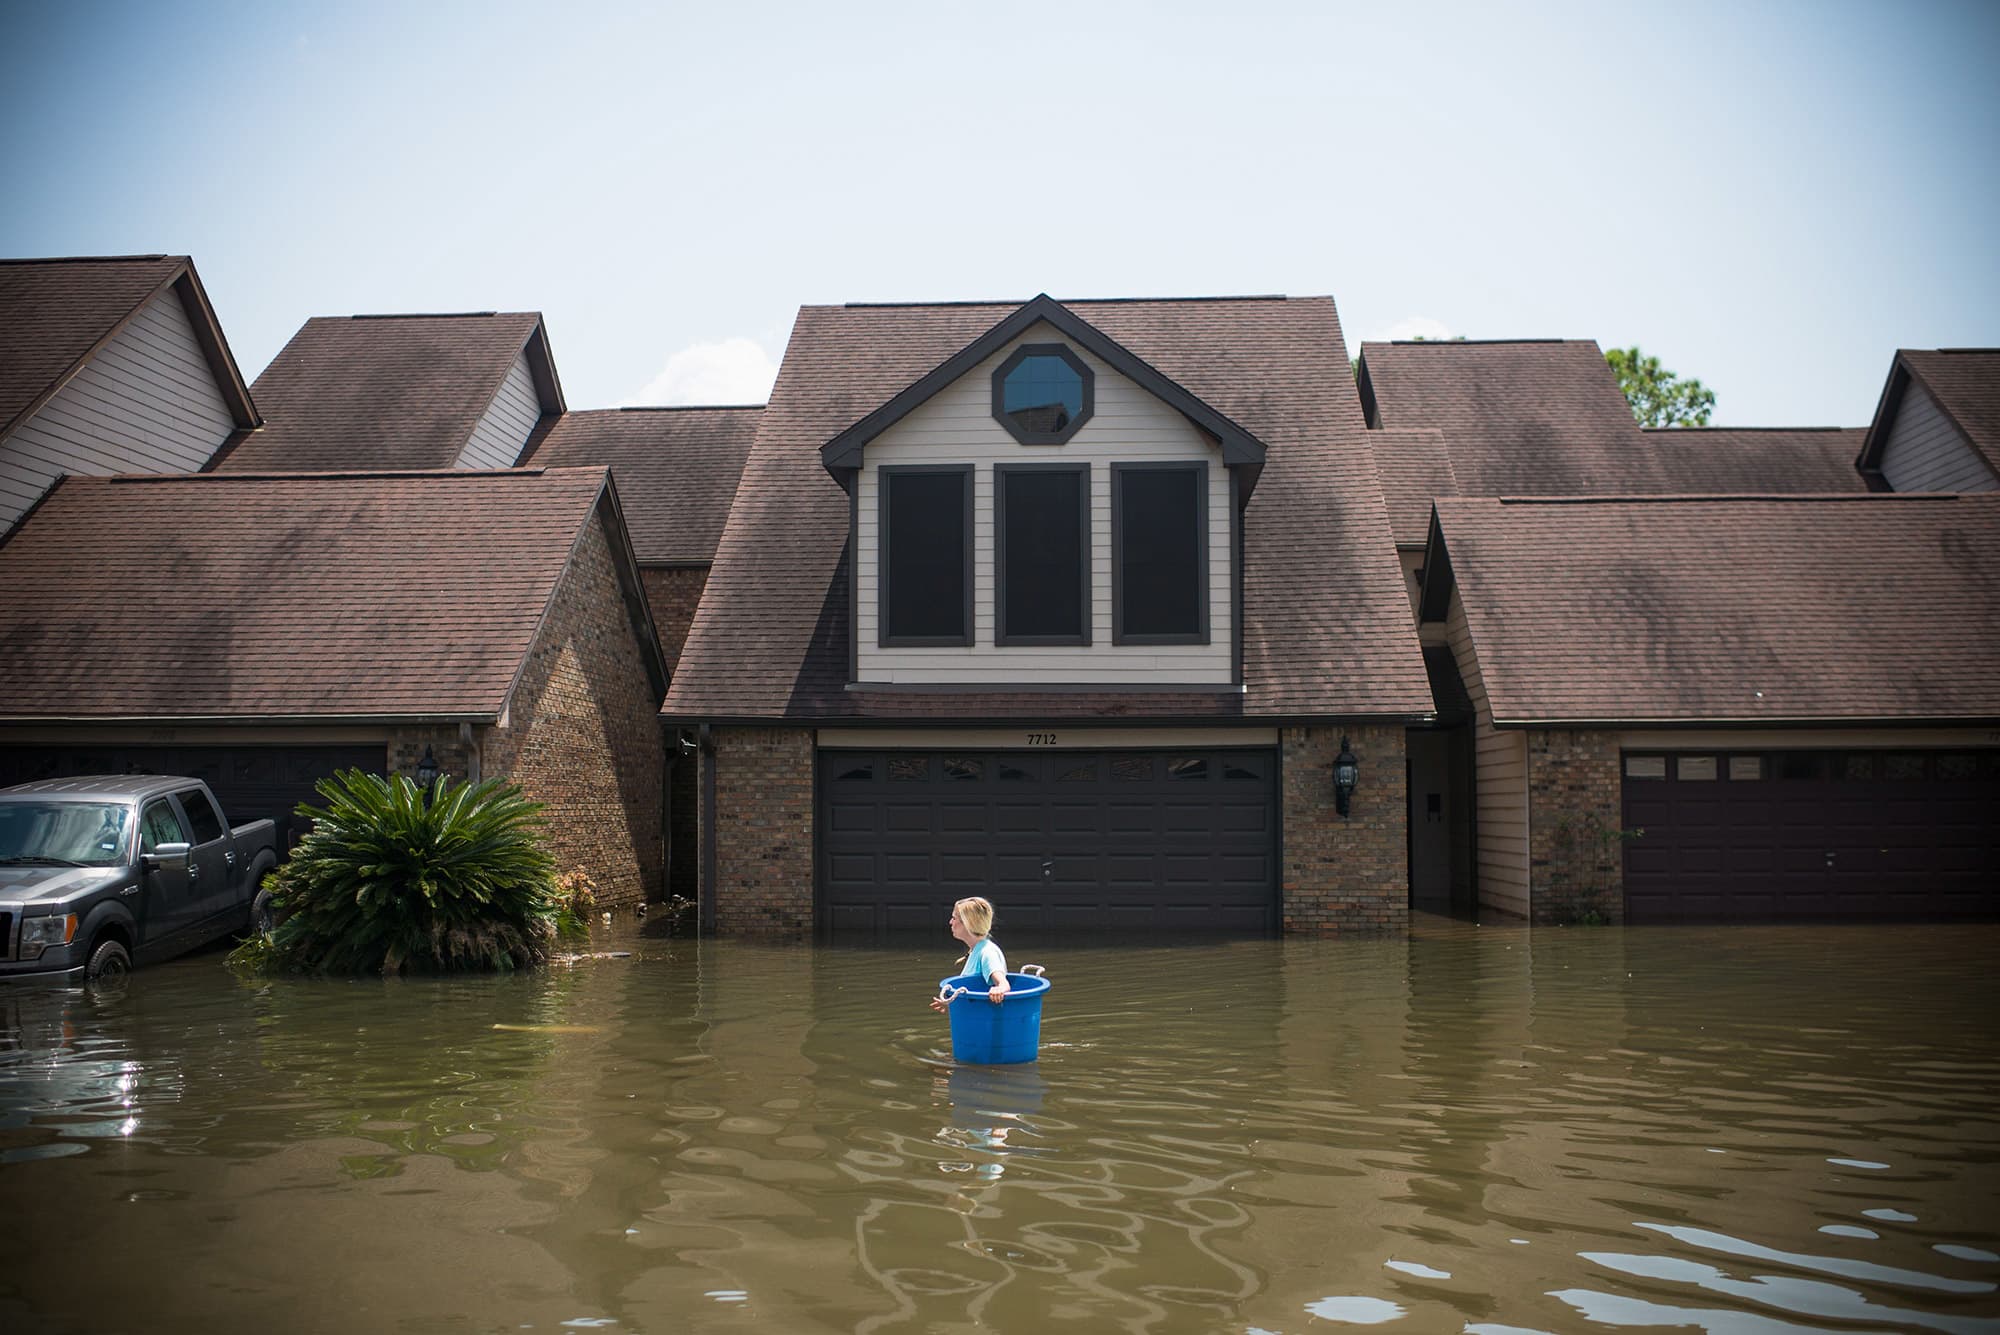 Mortgage market is unprepared for climate risk, says industry report